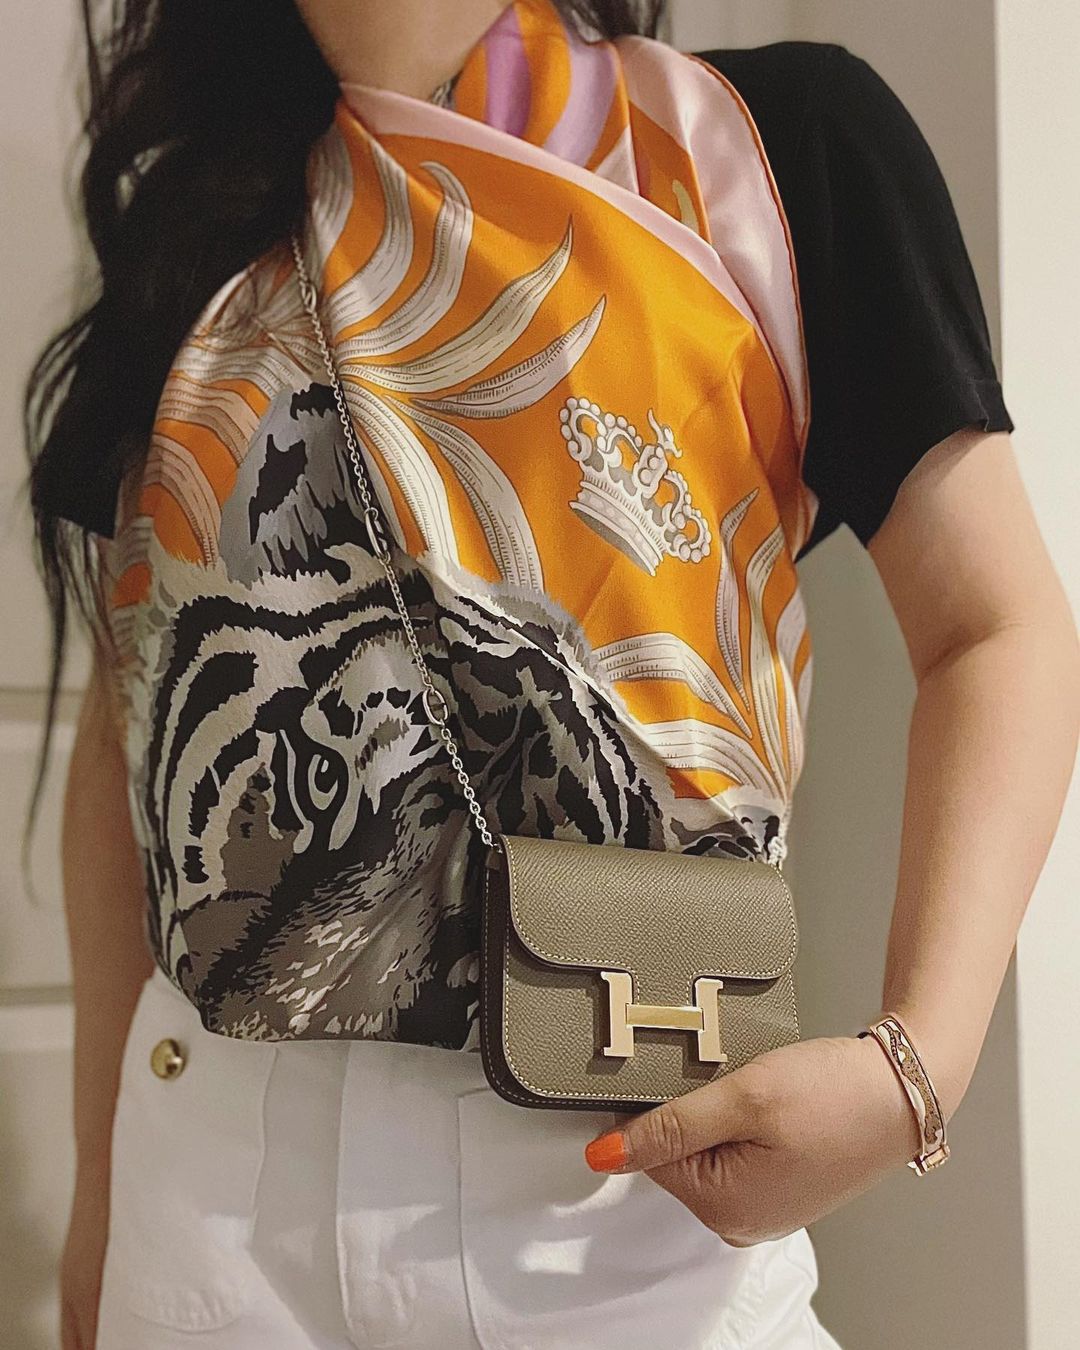 42 Hermes Scarf Outfits: What To Wear With a Hermes Scarf?